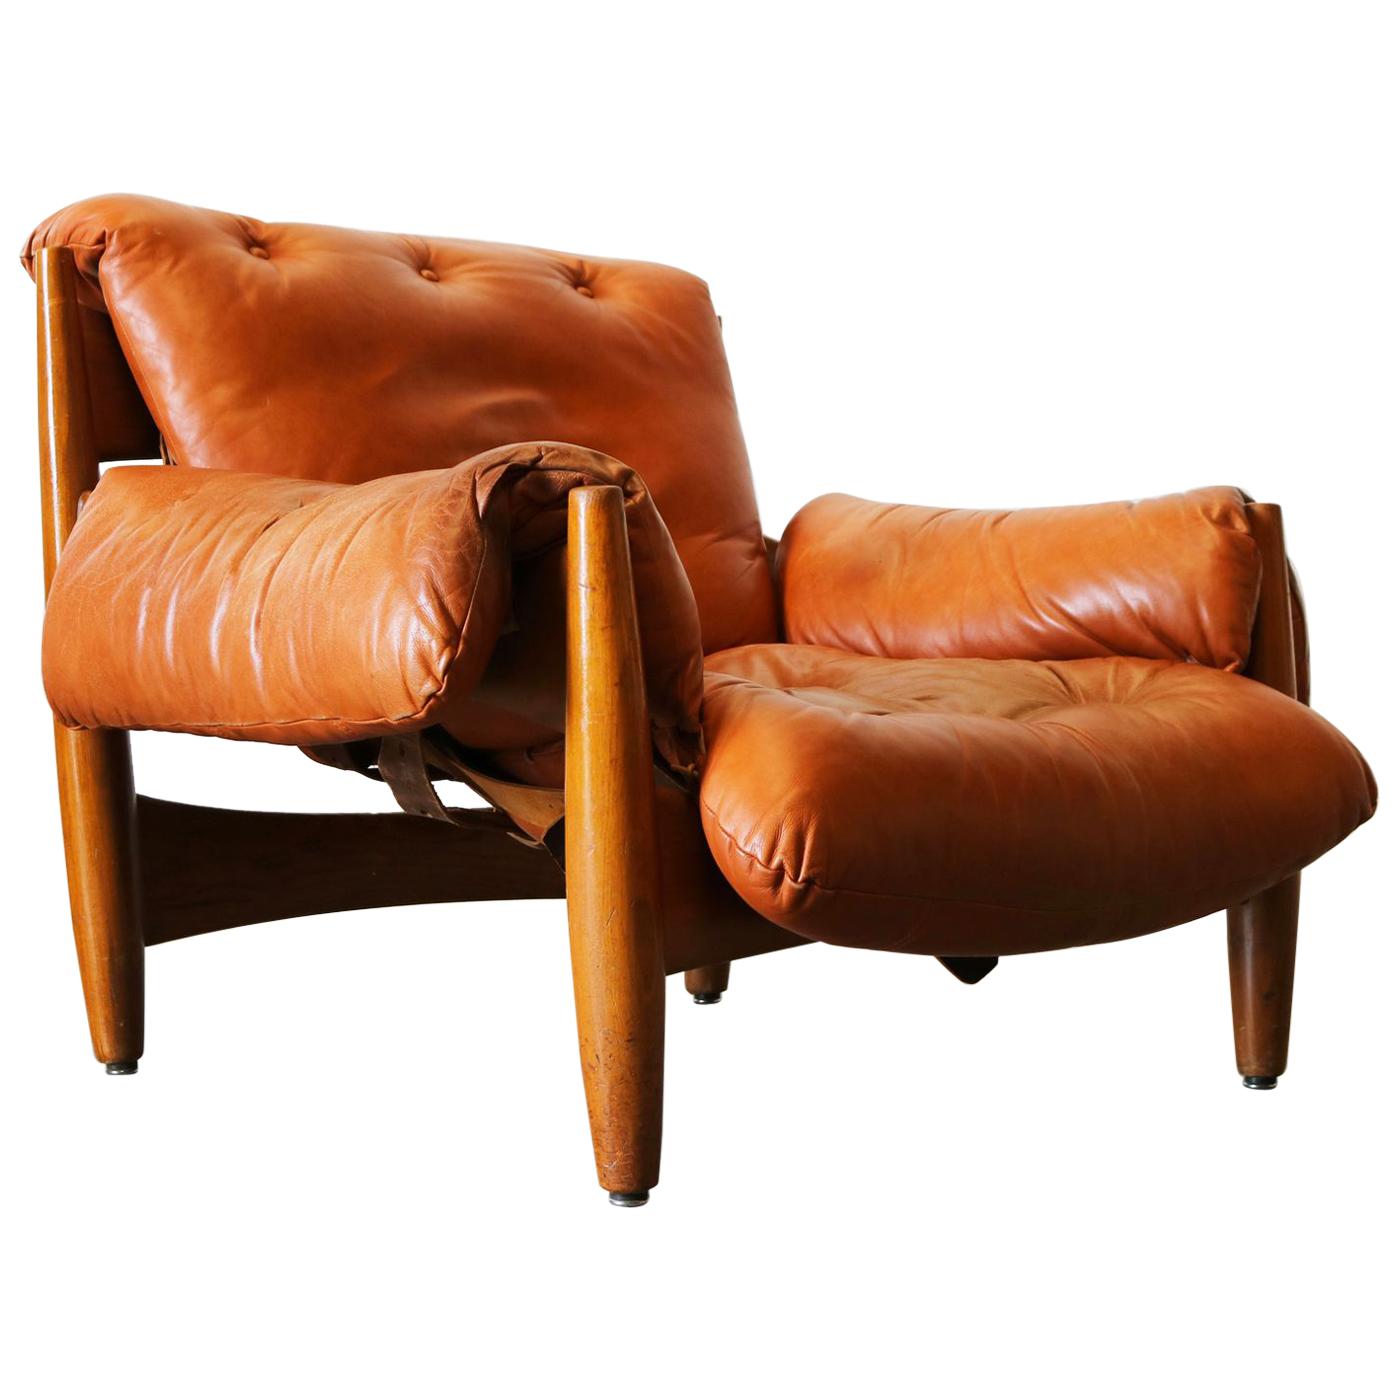 "Sheriff" Armchair by Sergio Rodriguez from I.S.A. Bergamo Mid-Century Modern